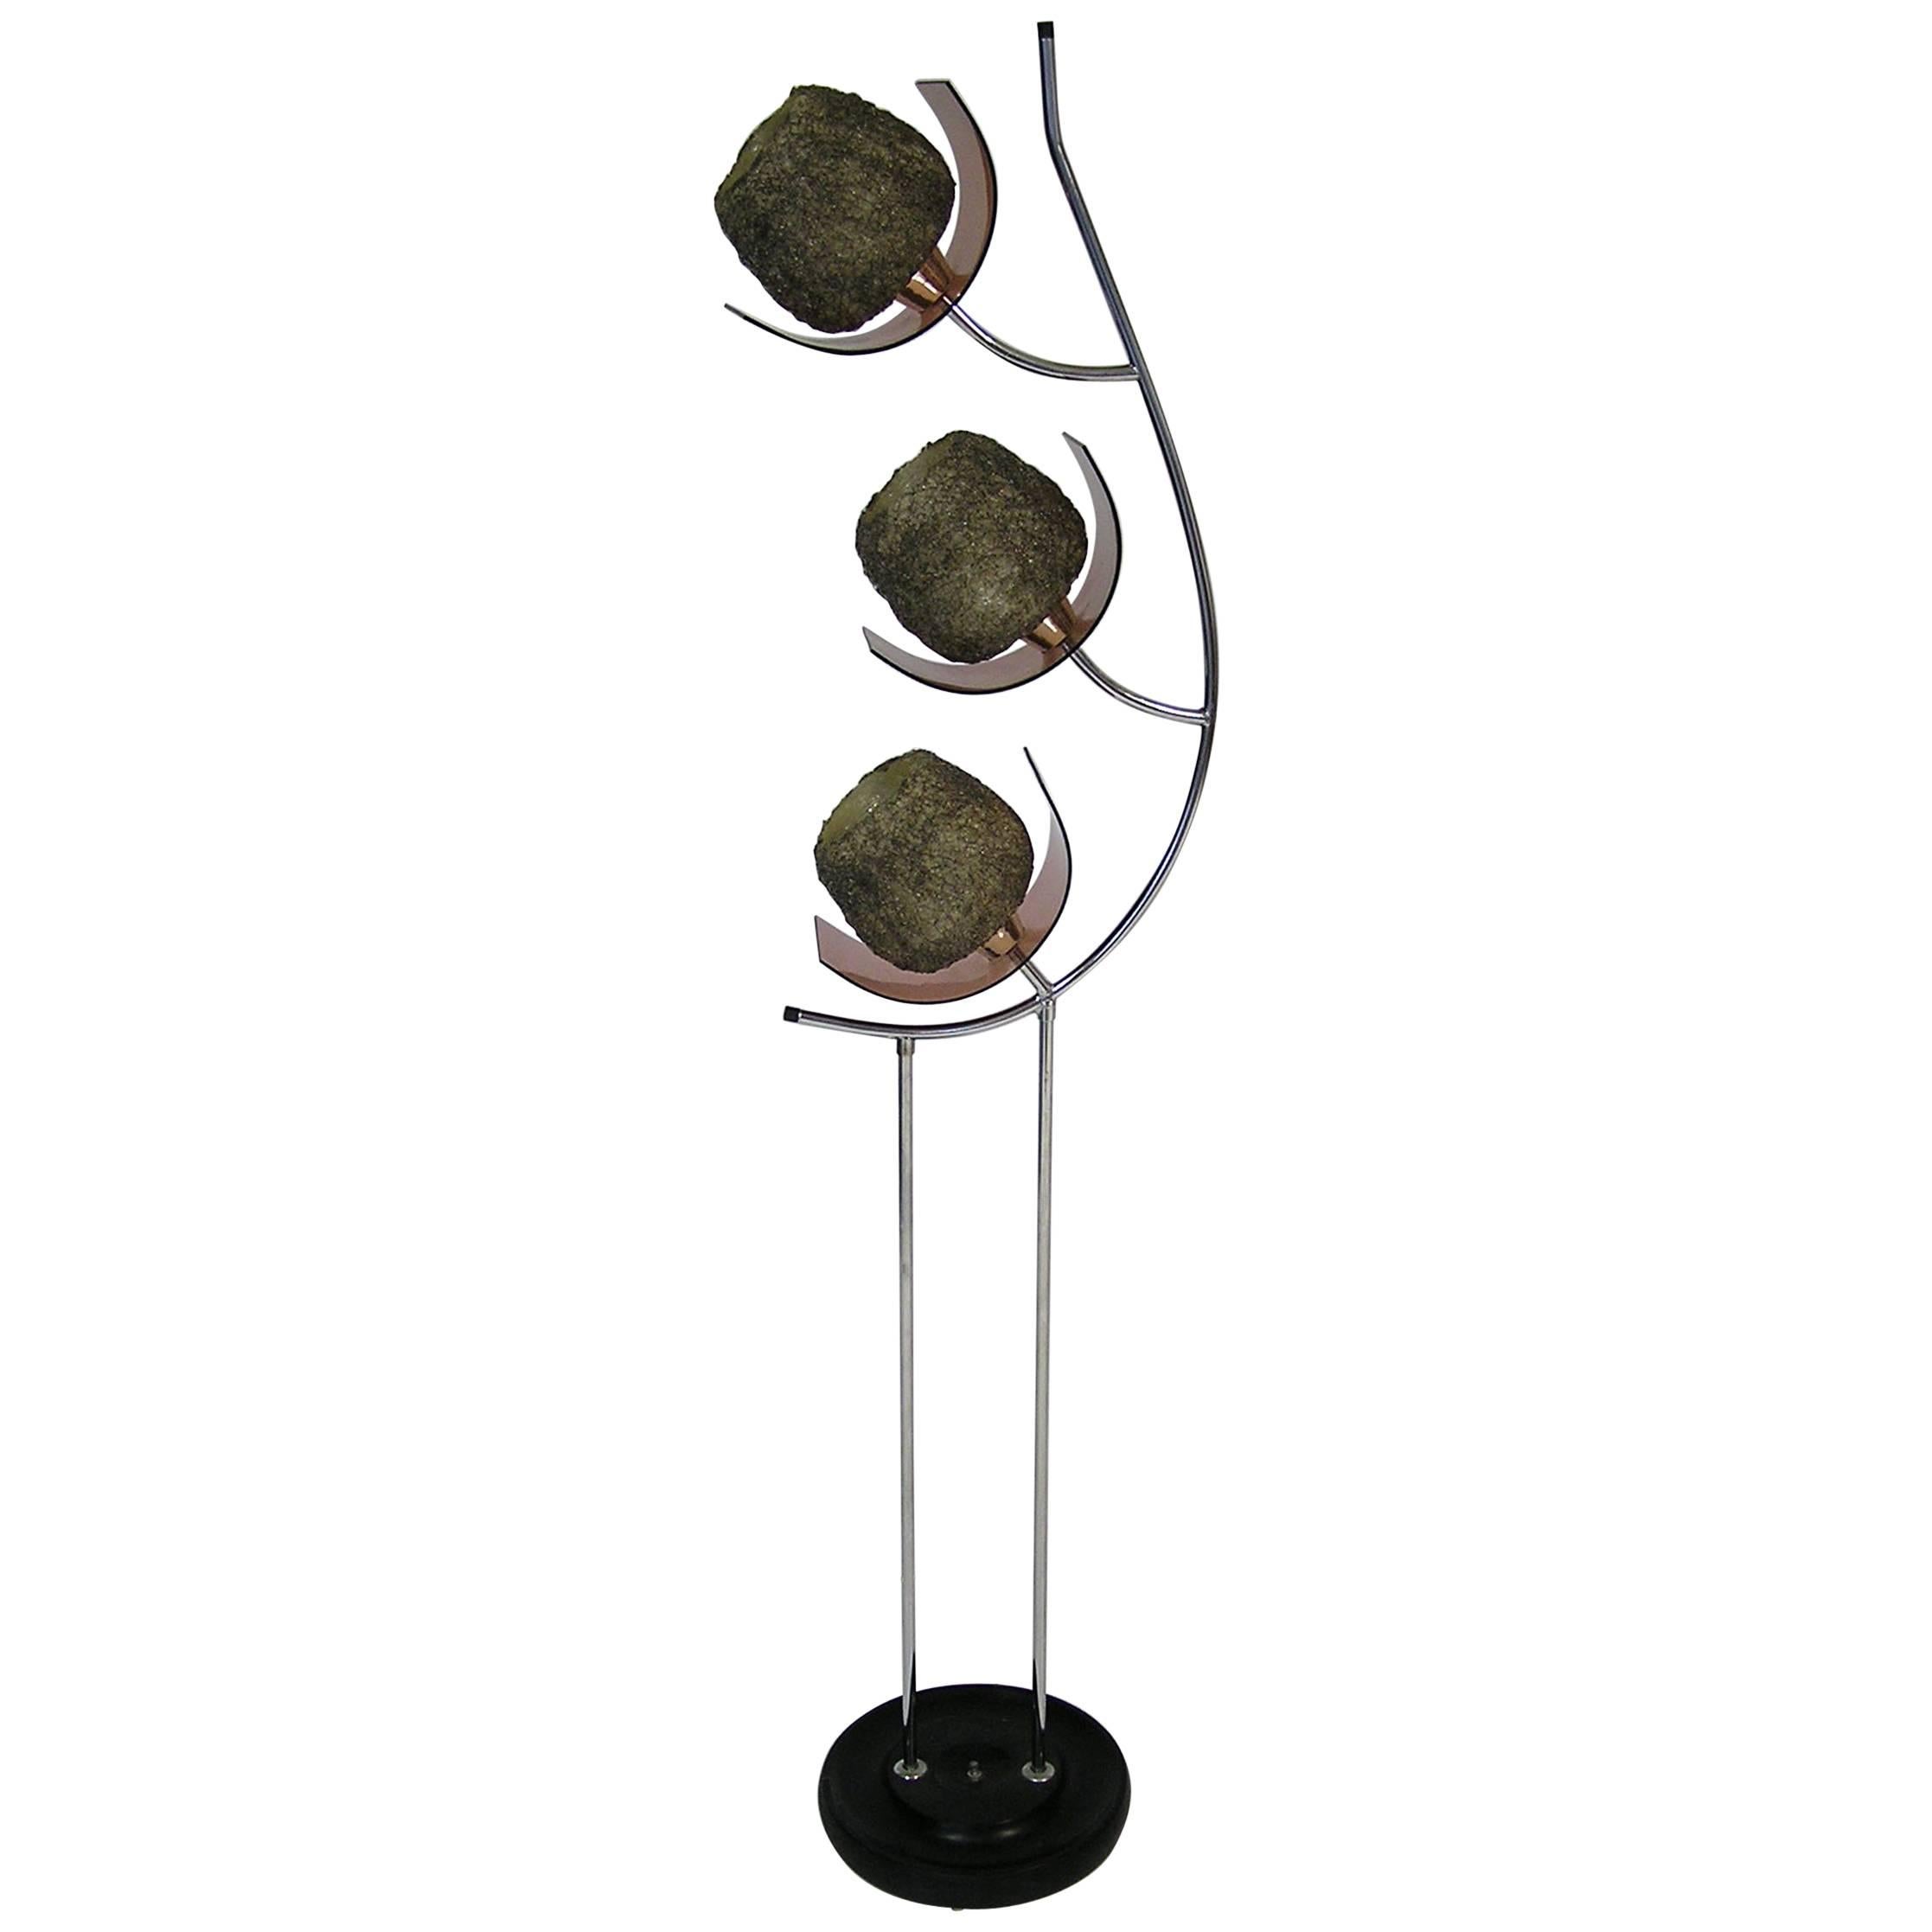 1960s Mid-Century Modern Chrome and Lucite Floor Lamp For Sale